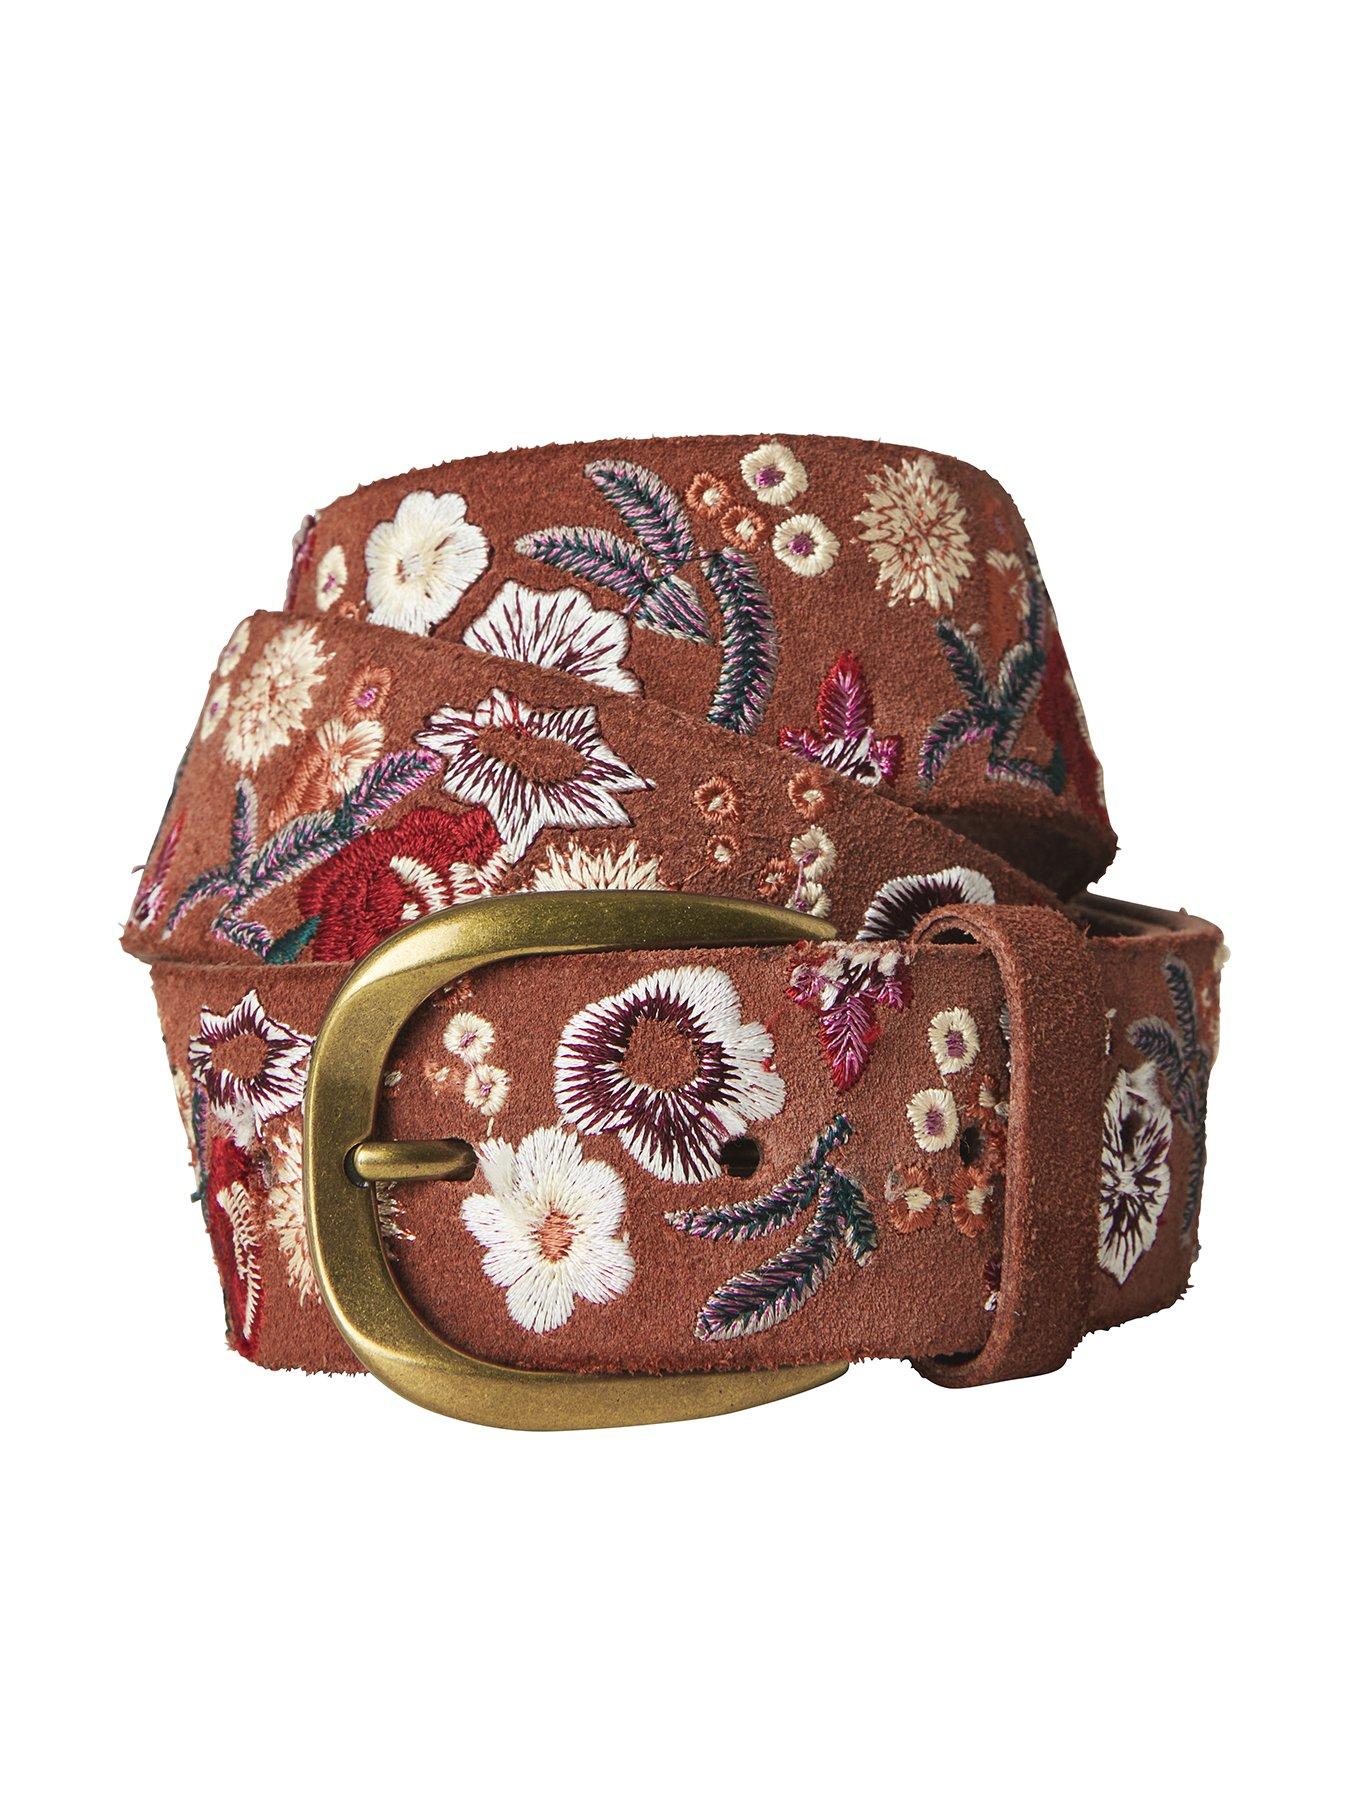  Ibiza Town Embroidered Leather Belt - Tan